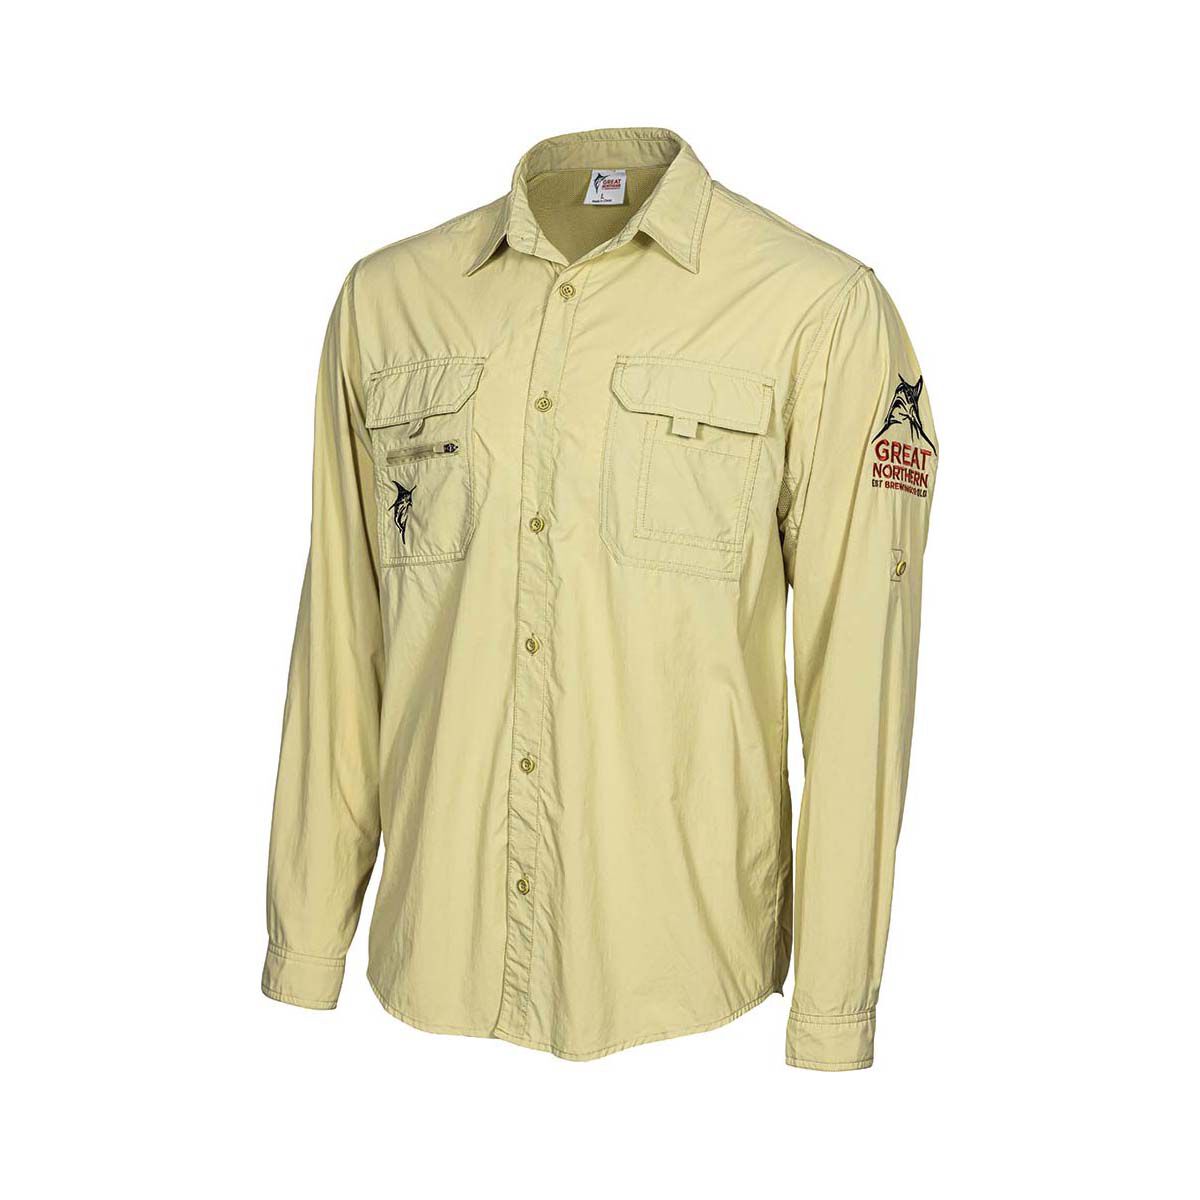  Huk Men's Beaufort Button Down  Fishing Shirt with Sun  Protection, Bone, Small : Clothing, Shoes & Jewelry